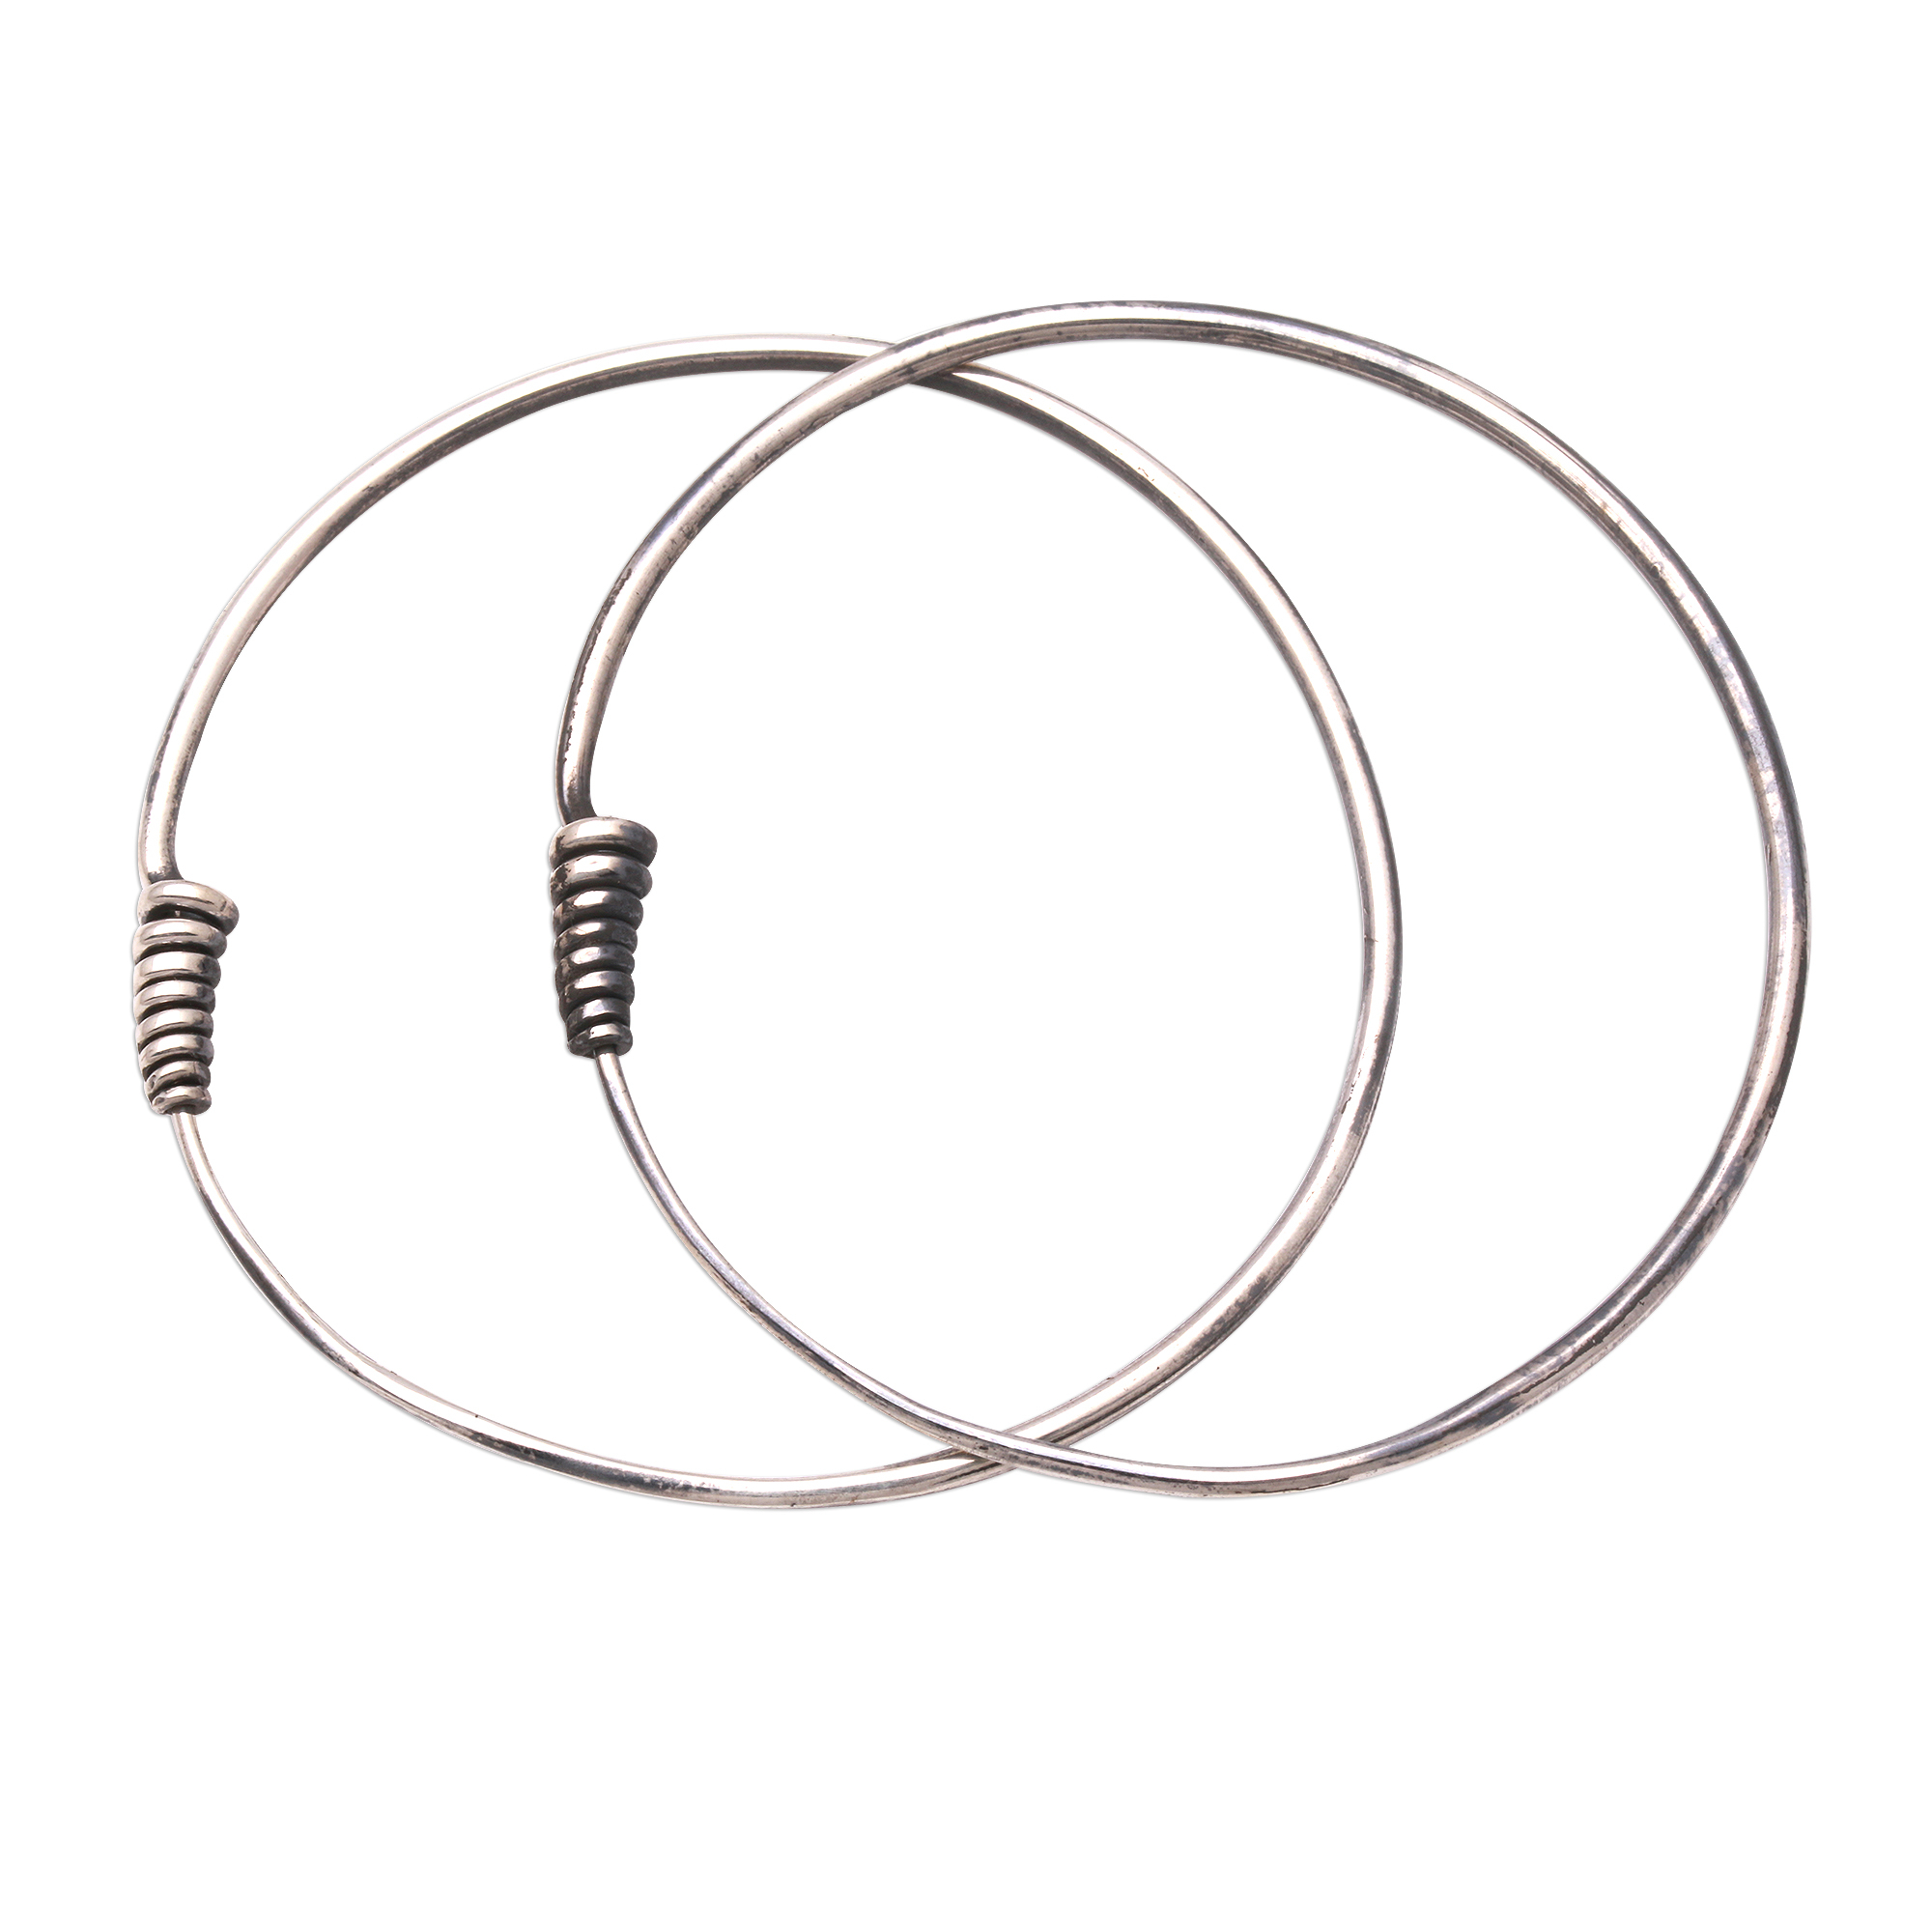 Spiral silver bali | Classic round earring | Silver hoop